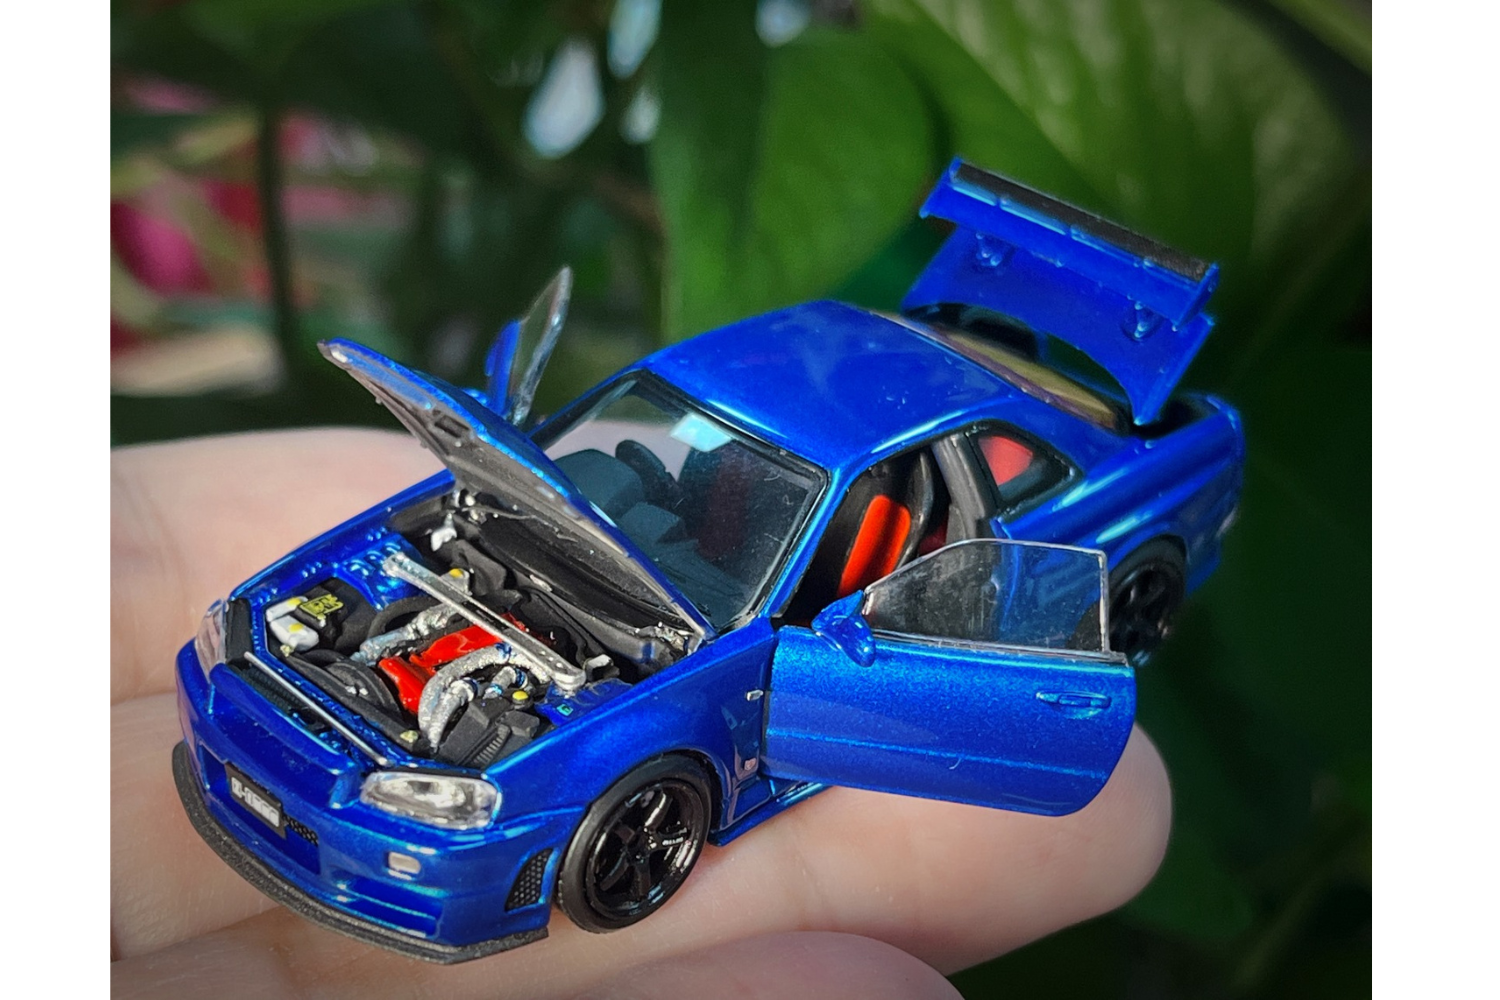 Fast Speed 1/64 Nissan Skyline GT-R (R34) Z-Tune High Wing Edition Fas –  Rocketbox Diecast Warehouse